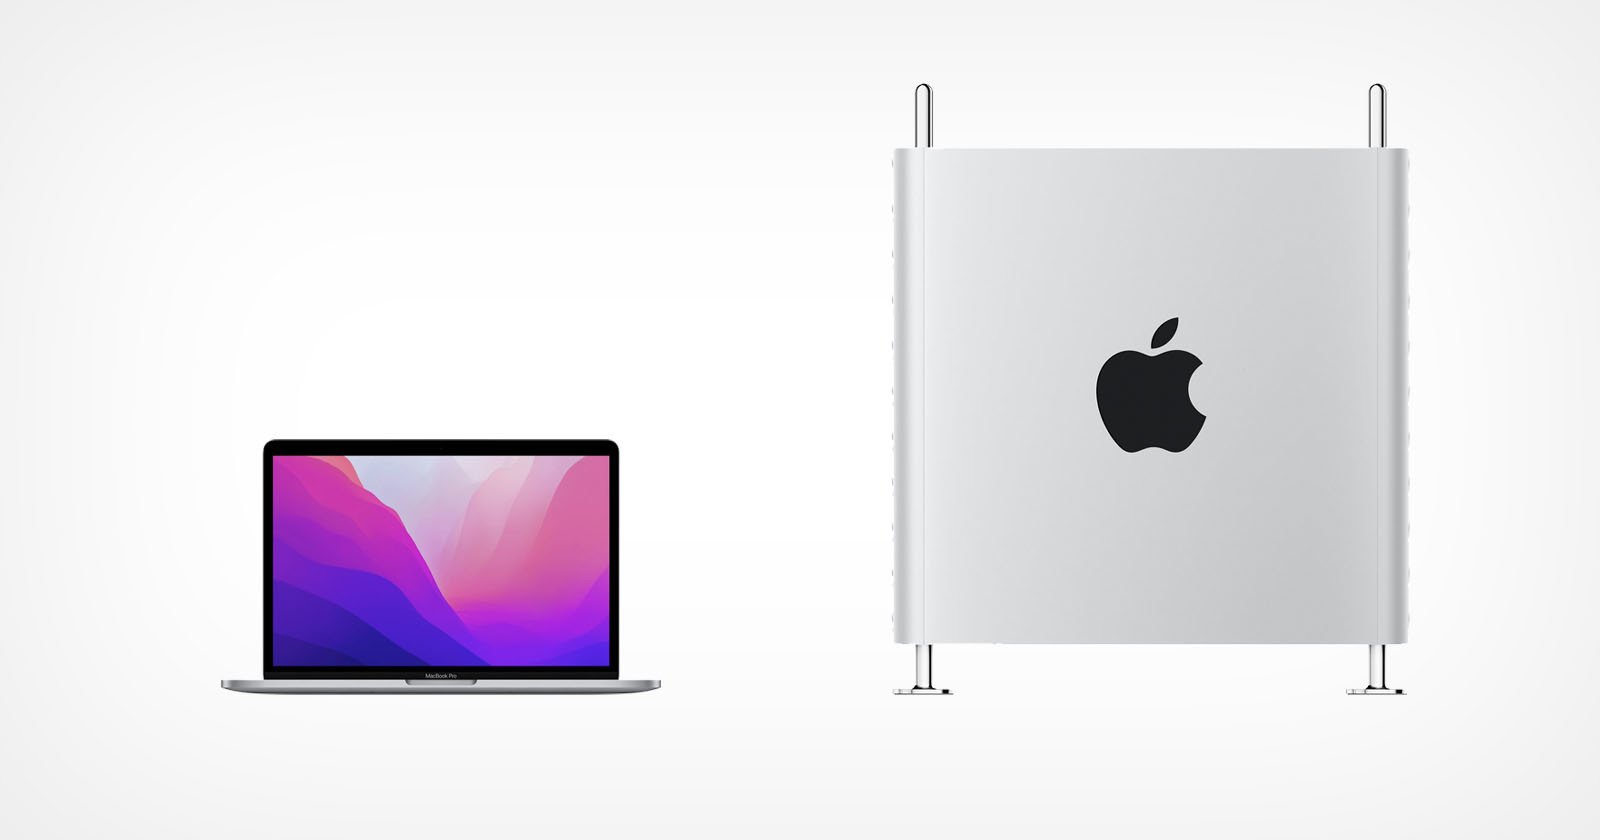 M2 MacBook Pro is More Powerful Than Base Mac Pro, for $5,000 Less